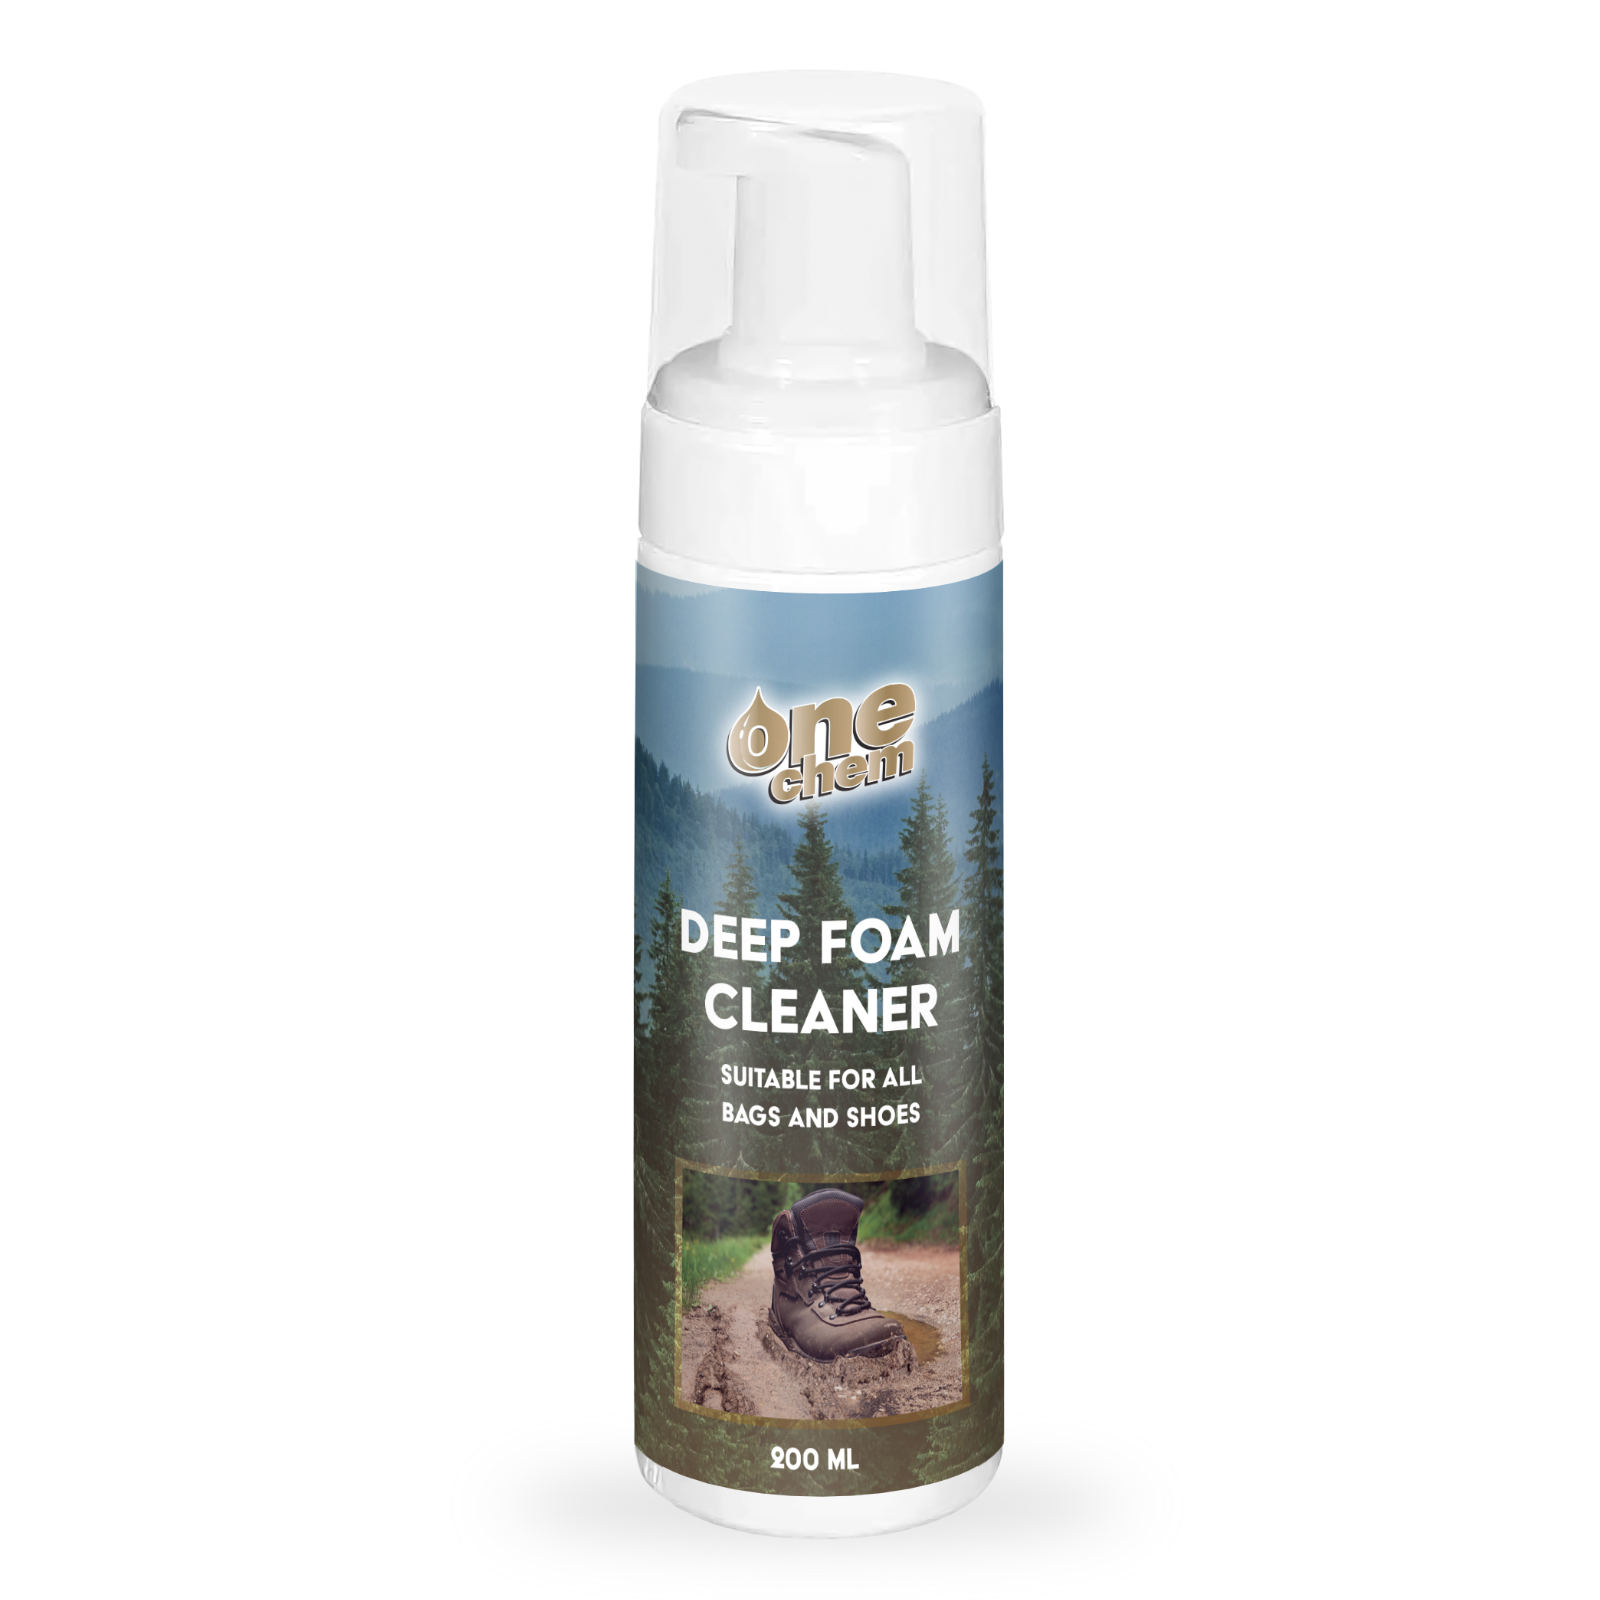 One Chem - Tent & Gear 1L and Deep Foam Cleaner 200ml